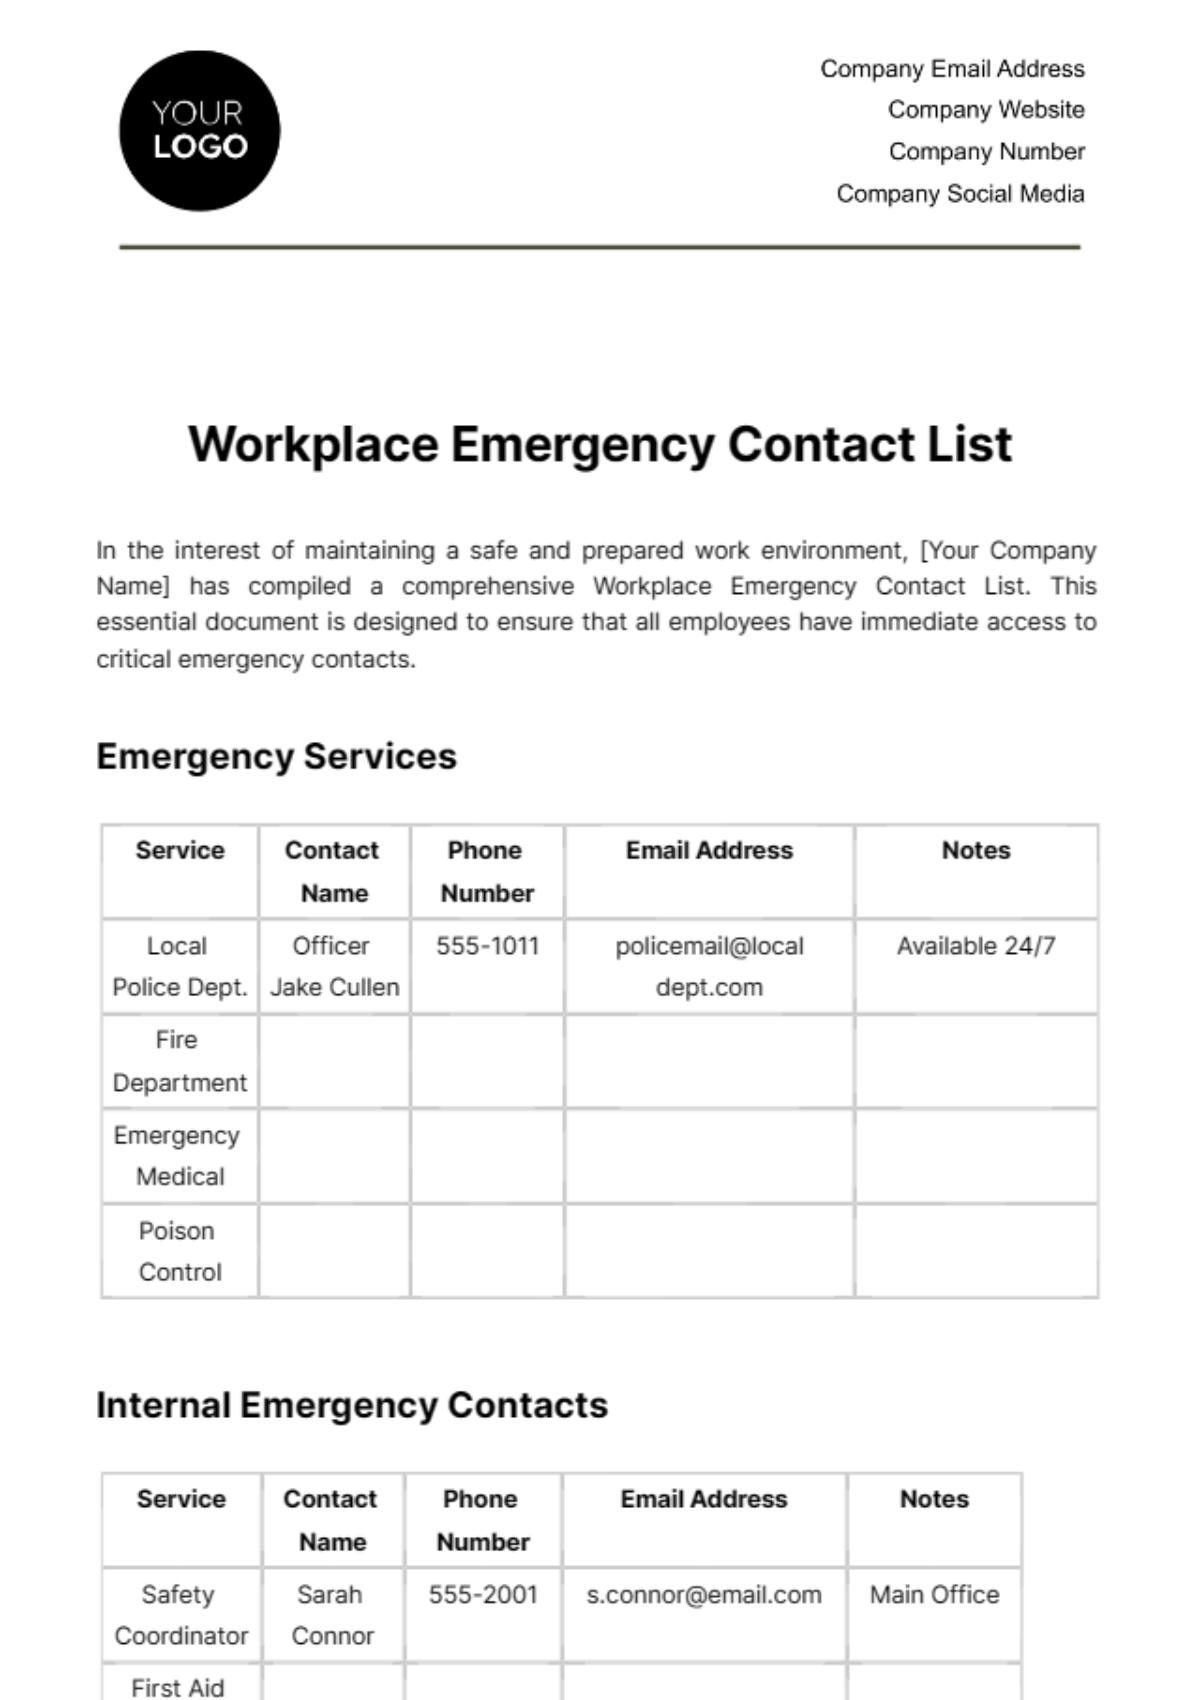 Workplace Emergency Contact List Template